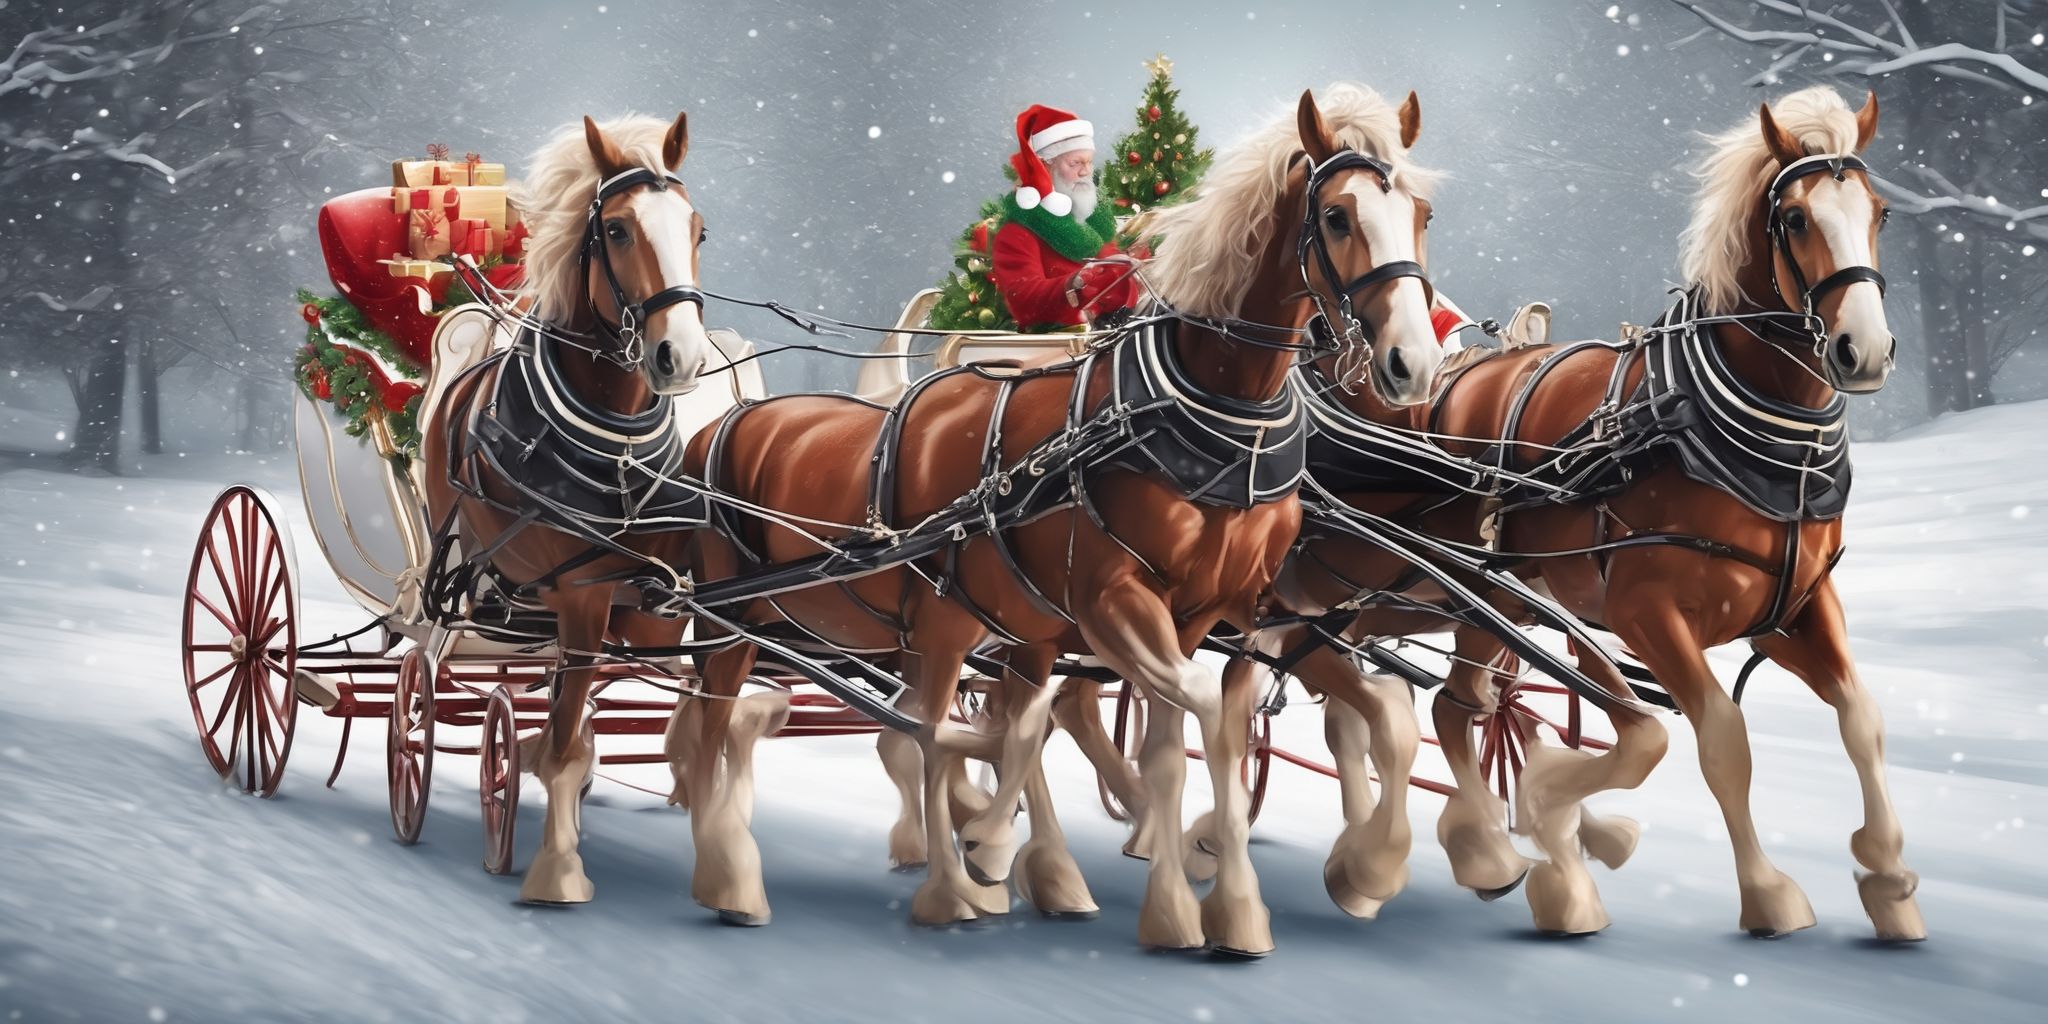 Horse-drawn sleigh in realistic Christmas style